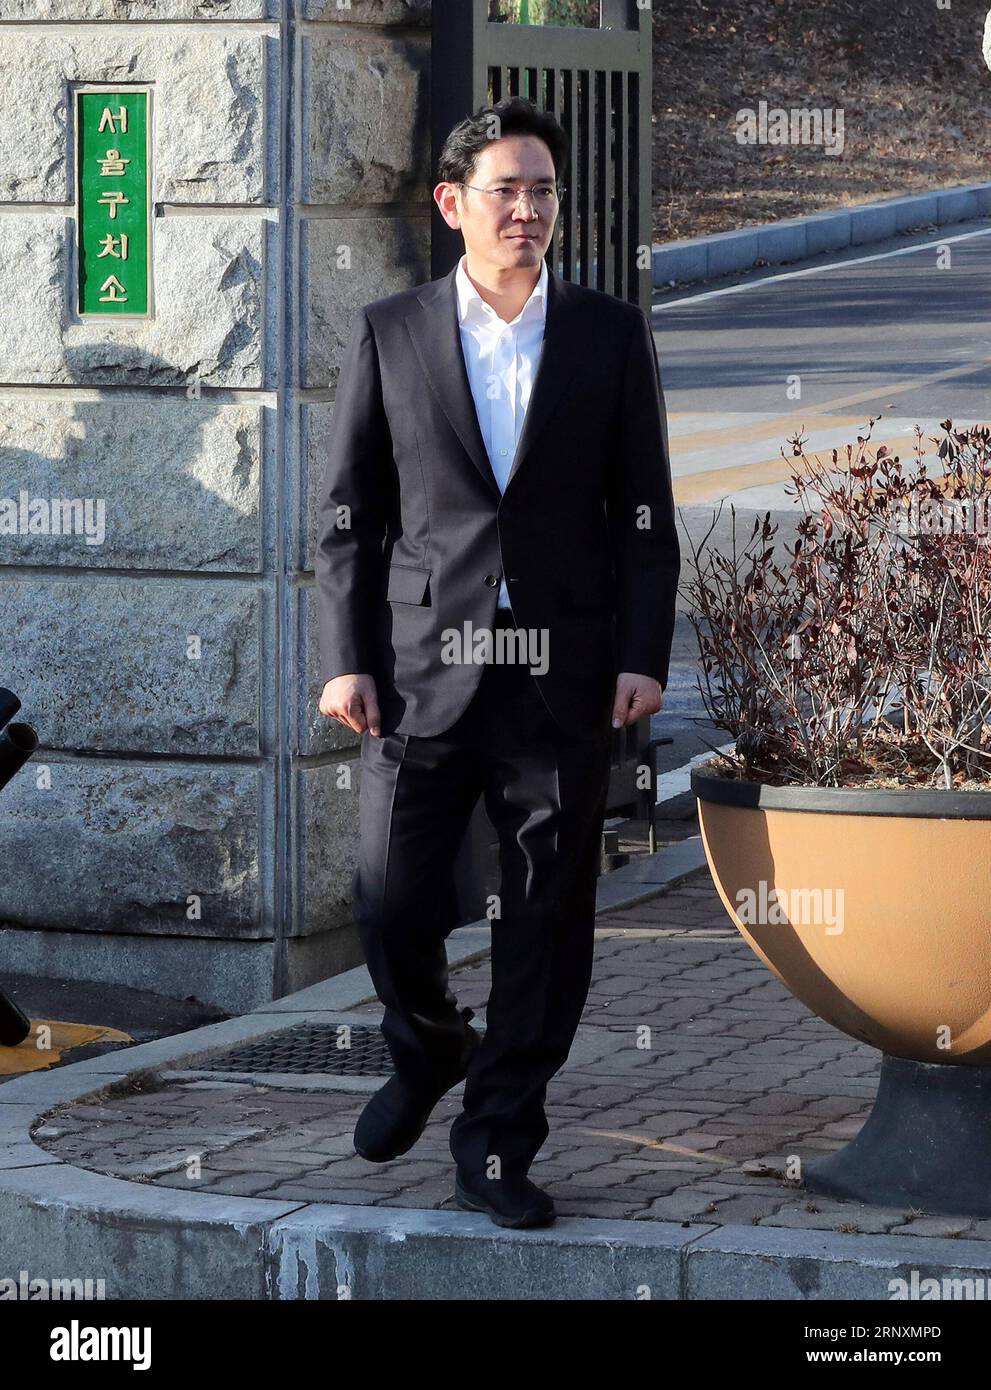 (180205) -- UIWANG, Feb. 5, 2018 -- Lee Jae-yong, vice chairman of Samsung Electronics, leaves a detention center in Uiwang, South Korea, on Feb. 5, 2018. A judge at the Seoul High Court Monday sentenced Lee Jae-yong, an heir apparent of Samsung Group, the country s biggest family-controlled conglomerate, to two and a half years in prison with a stay of execution for four years. ) (zjl) SOUTH KOREA-UIWANG-SAMSUNG-HEIR-SENTENCE LeexSang-ho PUBLICATIONxNOTxINxCHN Stock Photo